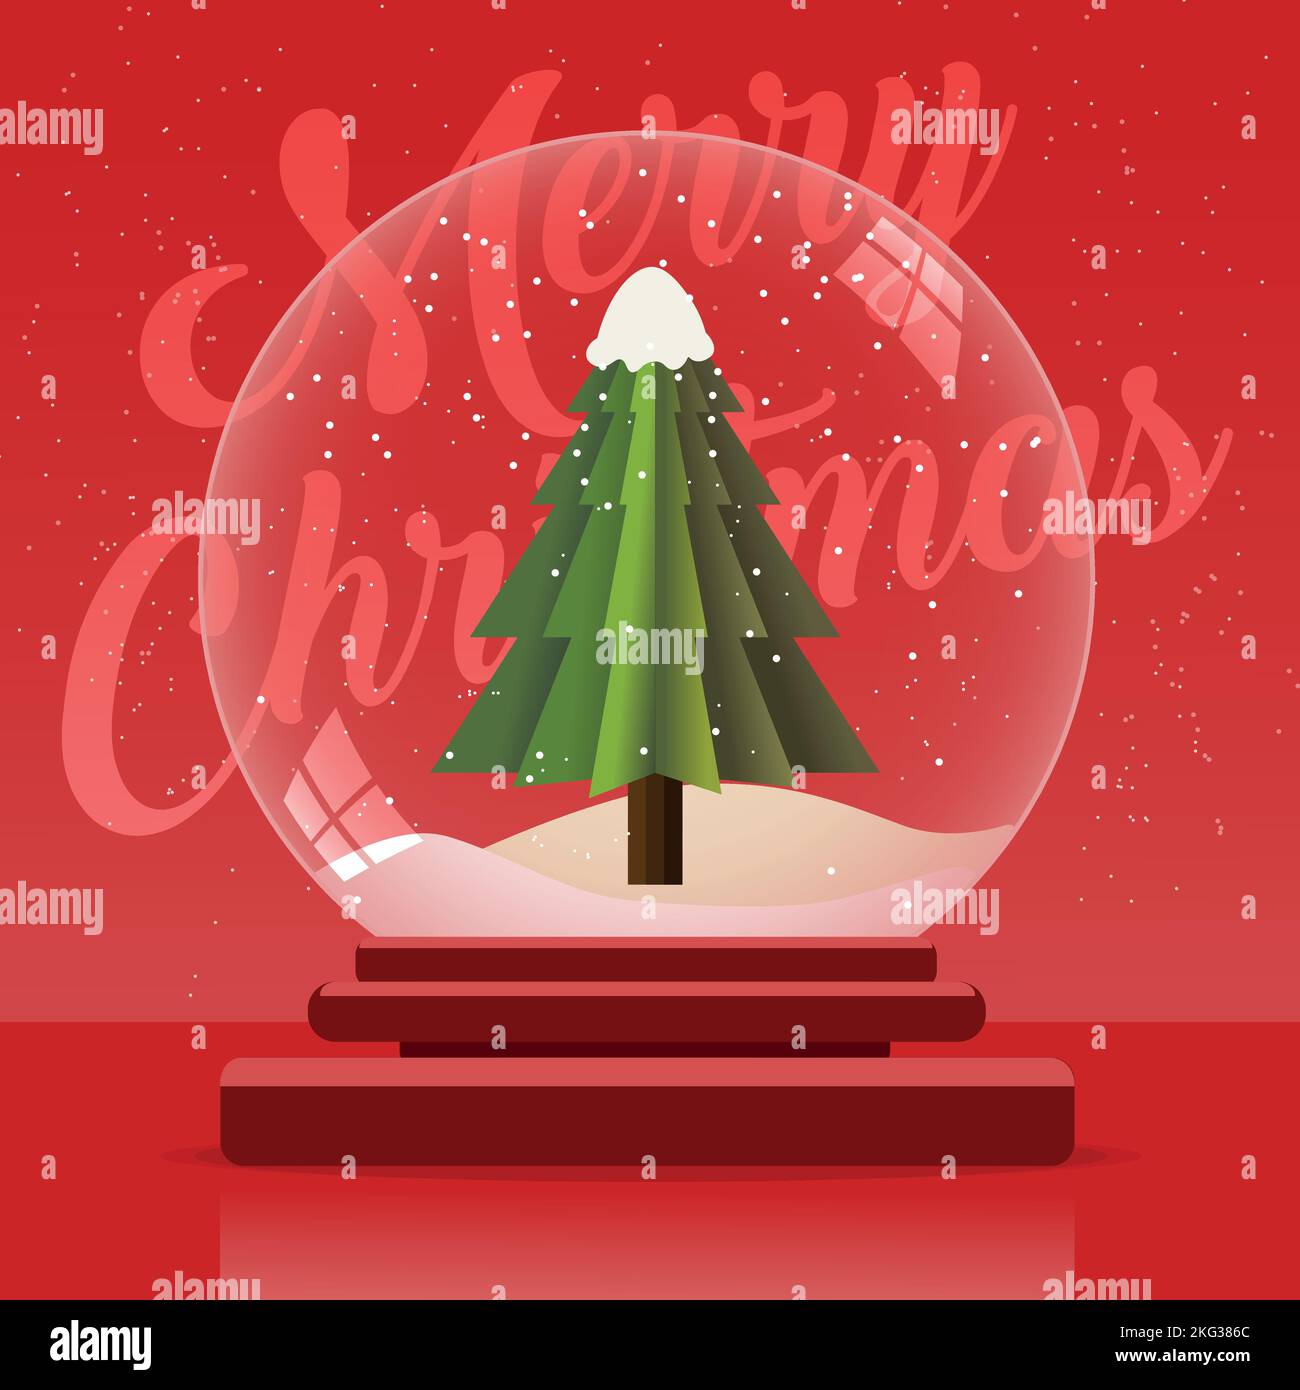 Vector illustration of a Christmas tree on snowy hills inside a crystal ball - Christmas greeting message on red background - Christmas vacation conce Stock Vector